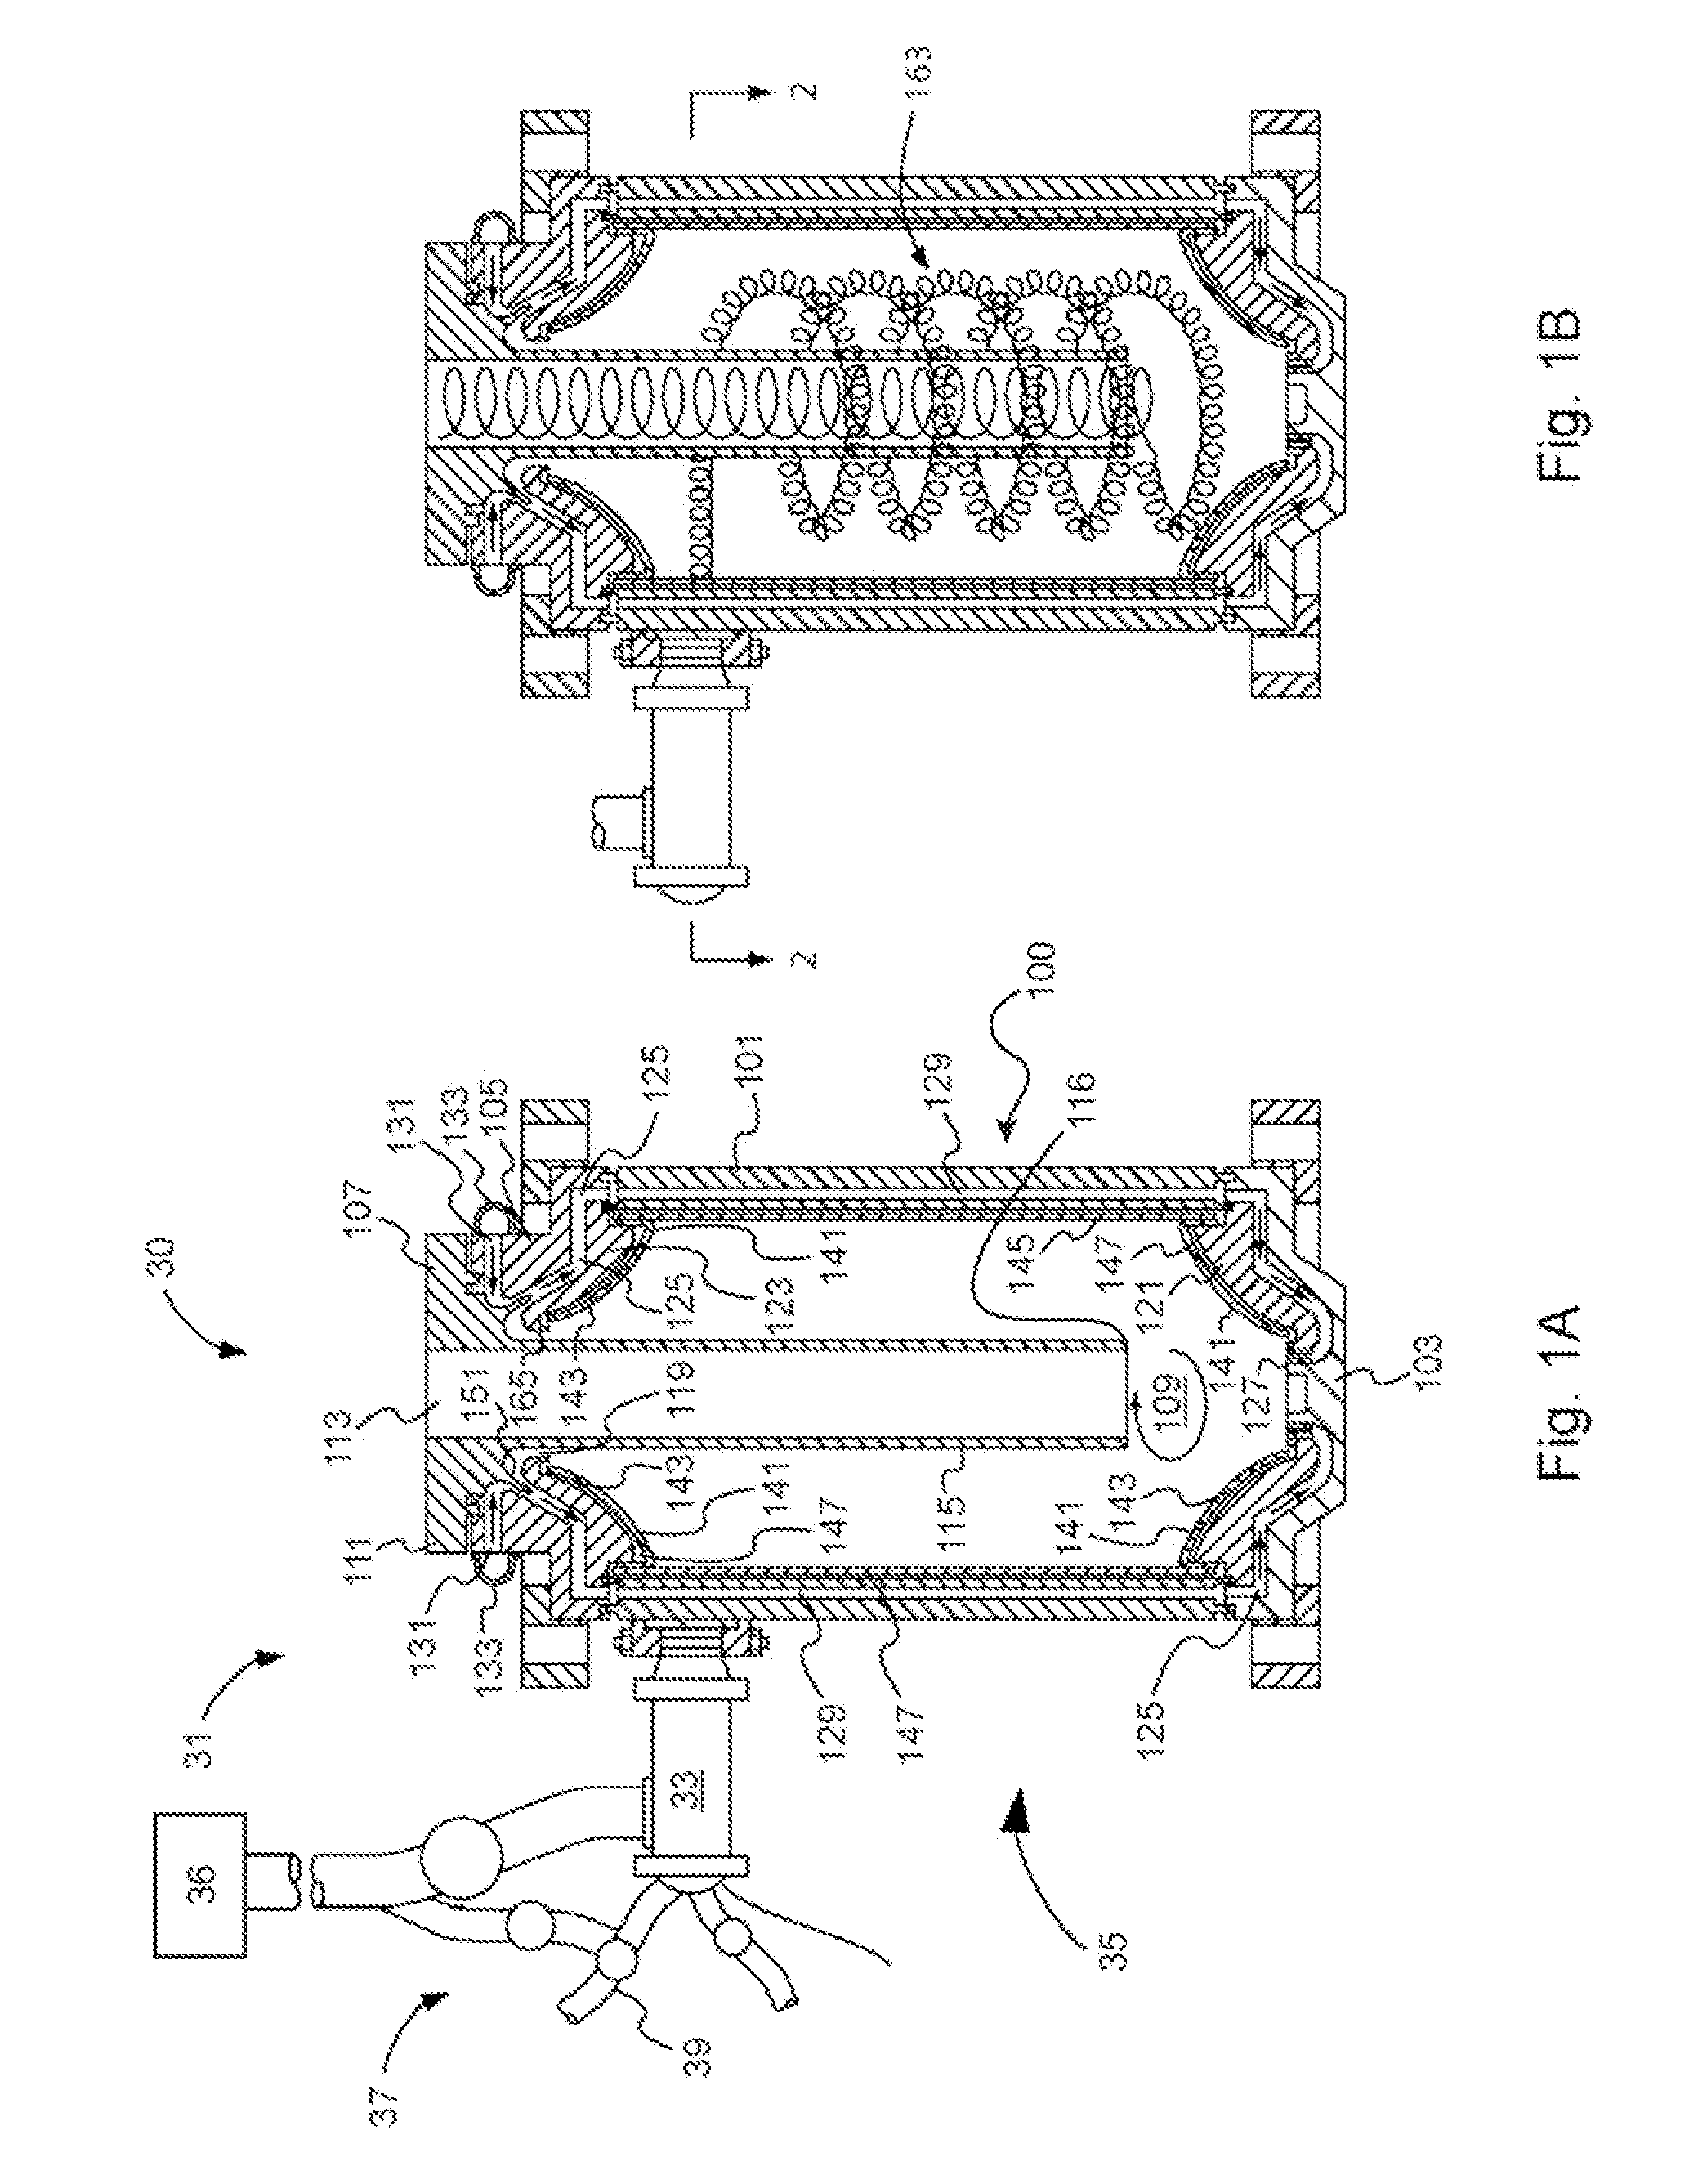 Apparatus and Methods For Providing Uniformly Volume Distributed Combustion of Fuel